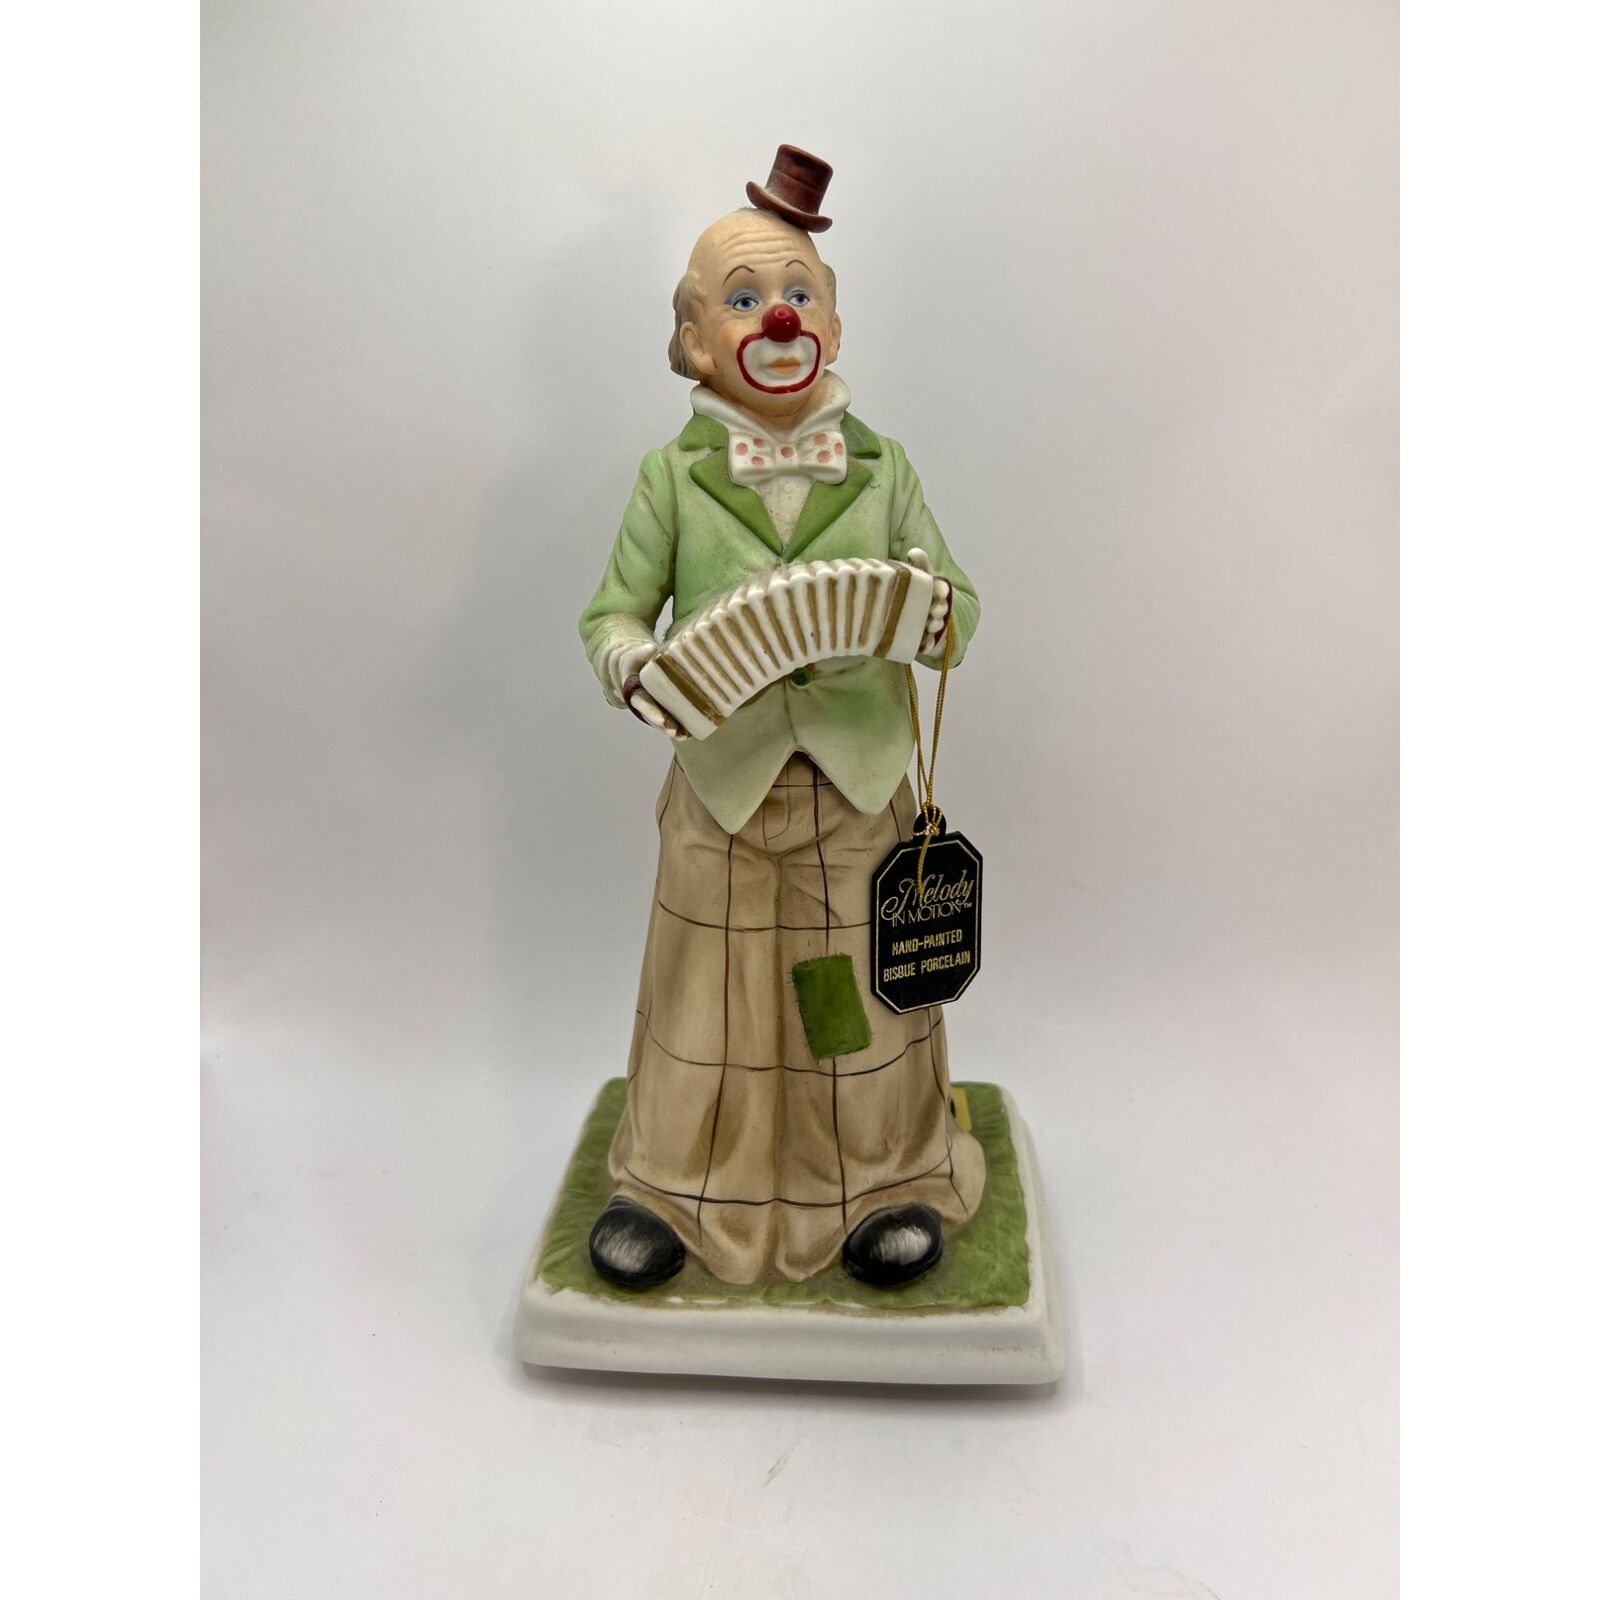 Melody In Motion Accordion Clown Musical 1985 Bisque Porcelain Figurine NWT Waco